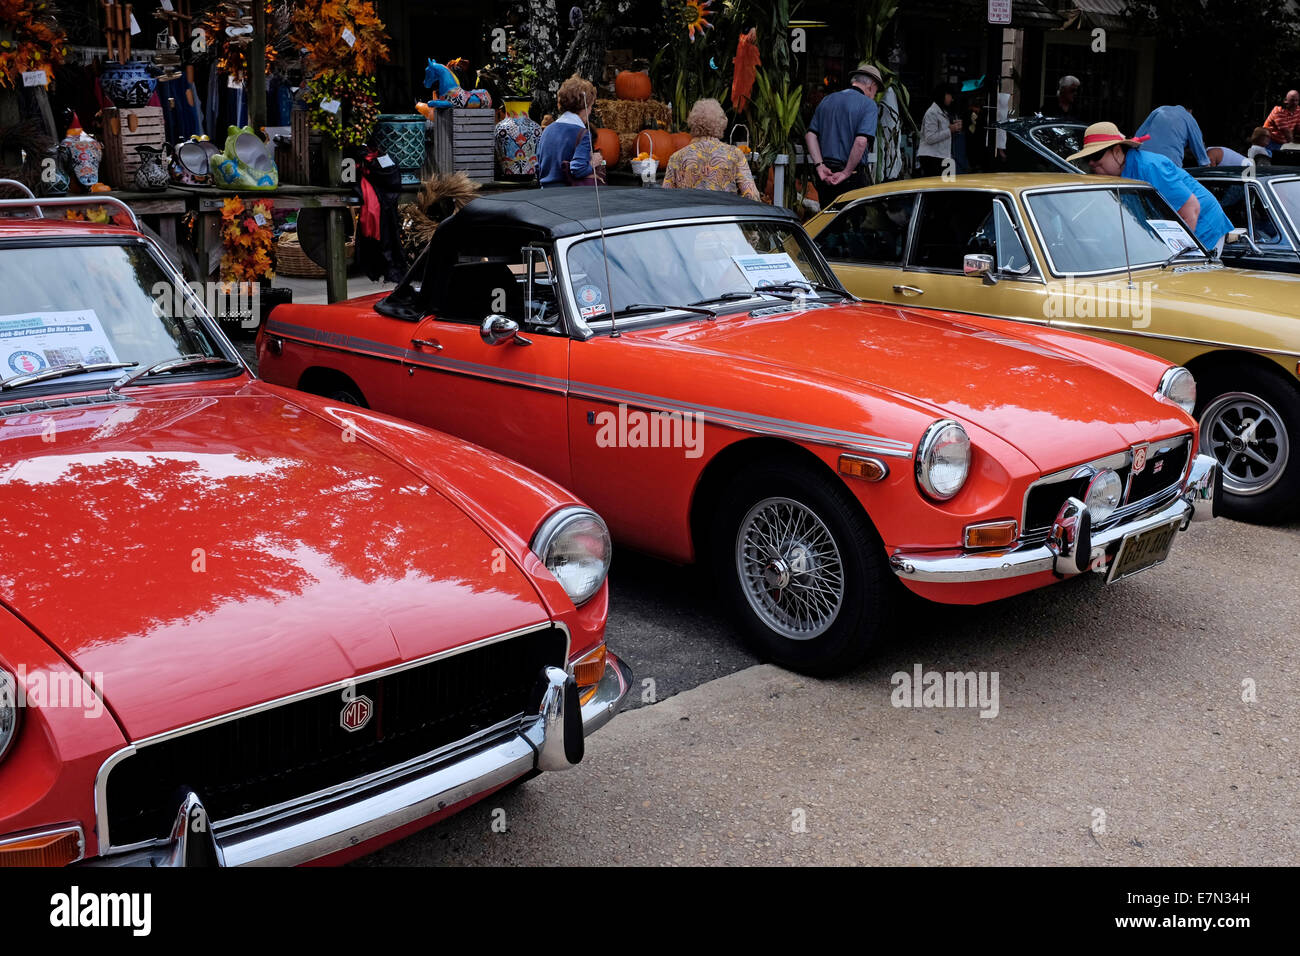 Crowds and vintage cars at the Brits by the Beach Automobile show in Ocean Grove, NJ Stock Photo